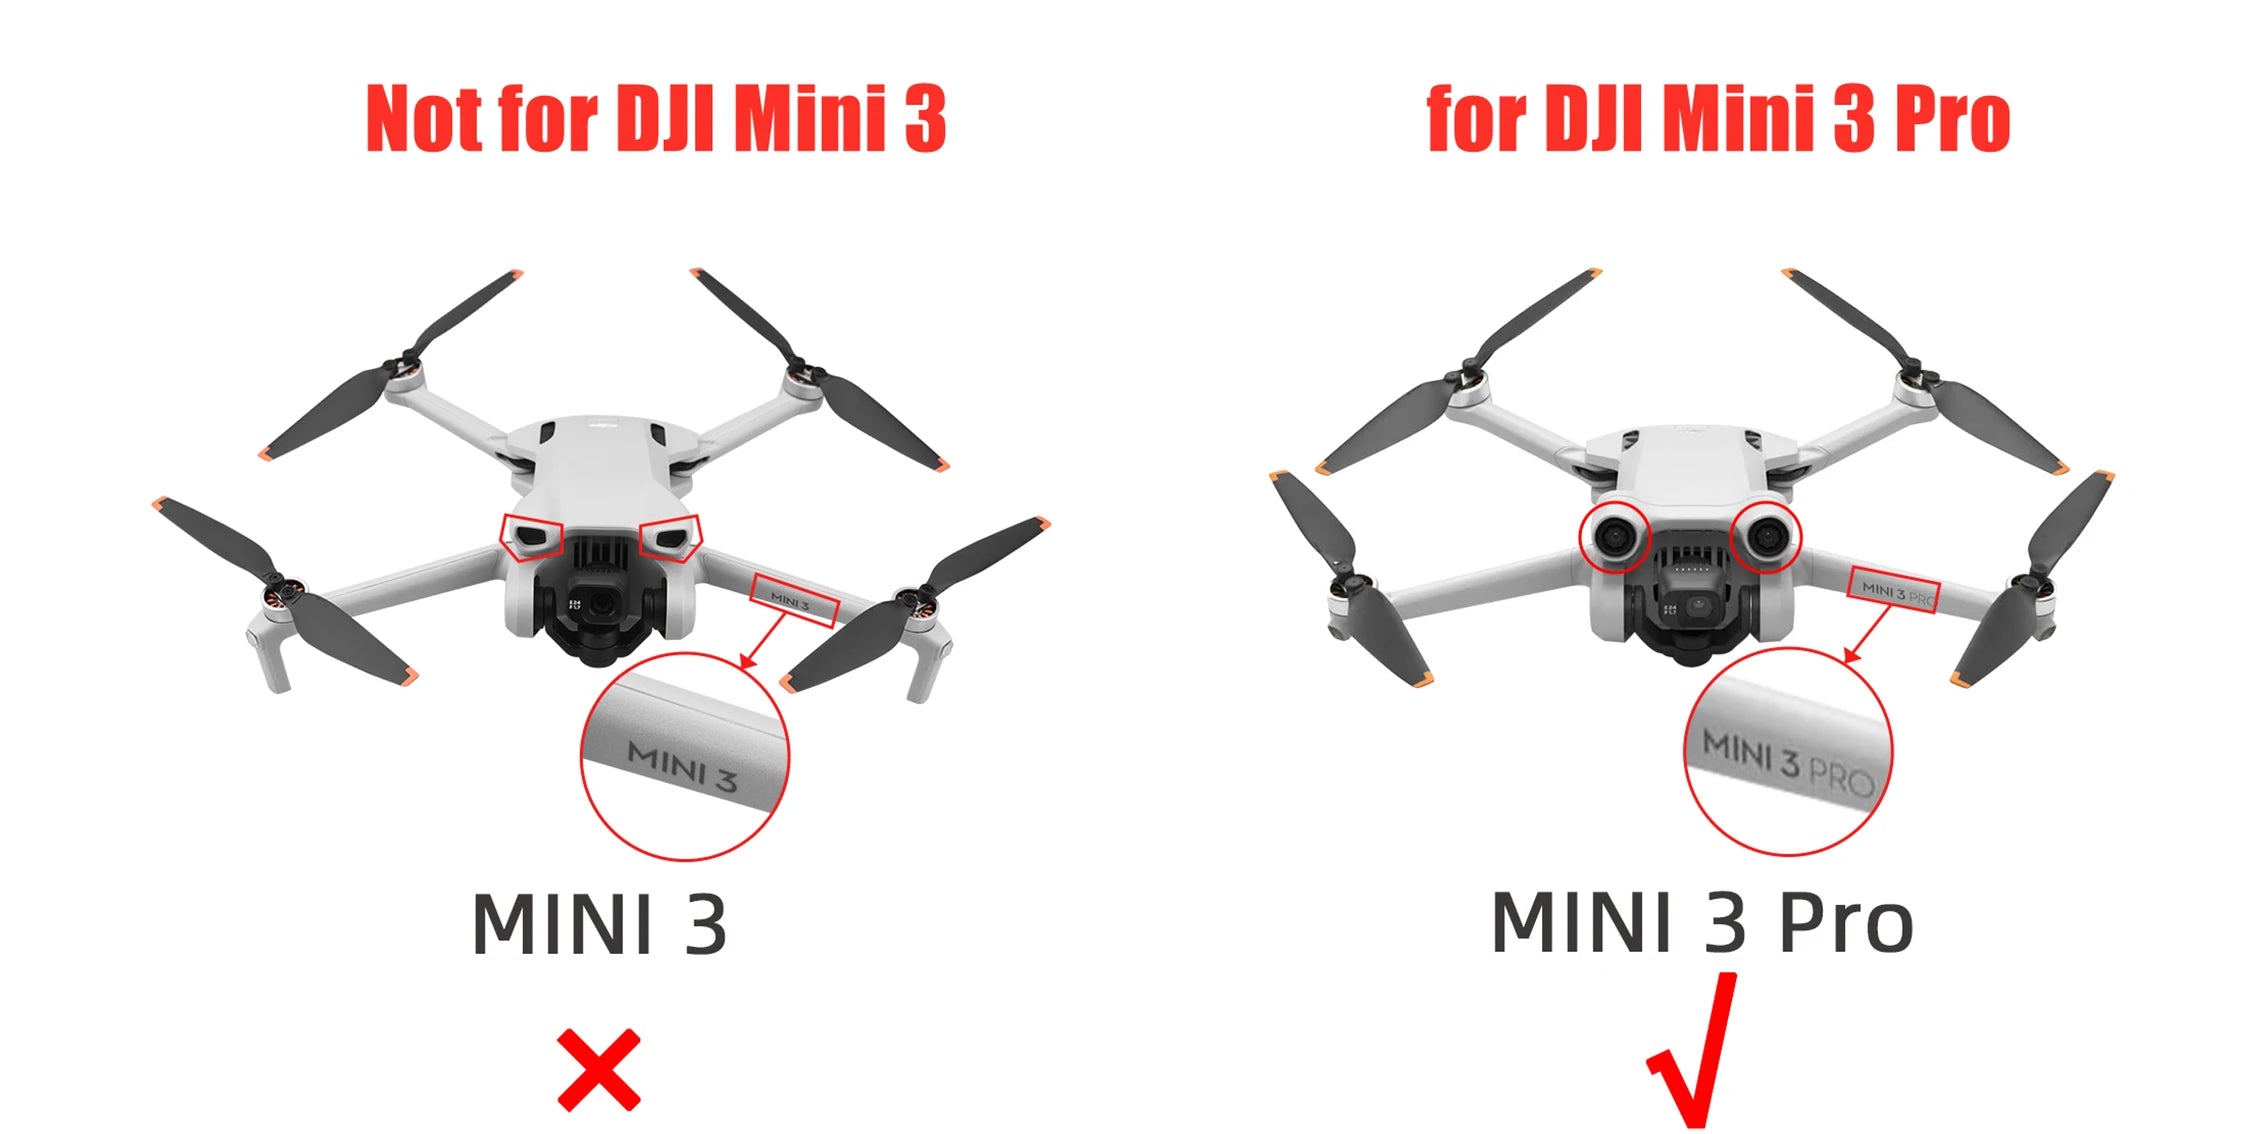 Lens Cover Not available for DJI MINI 3 .